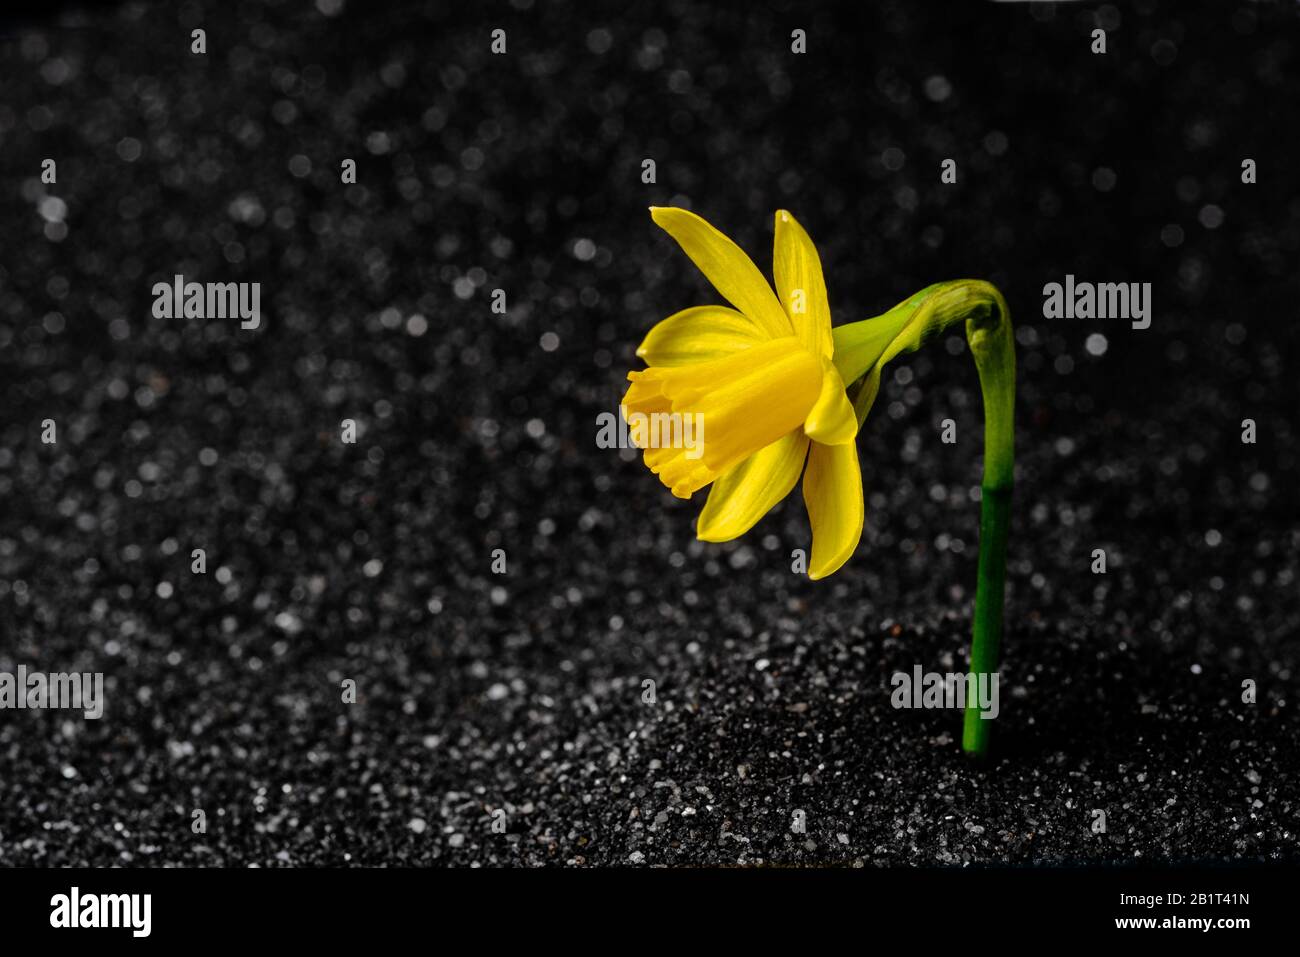 Daffodil, tete tete, growing in black sand defying all odds to survive in adverse conditions. Stock Photo